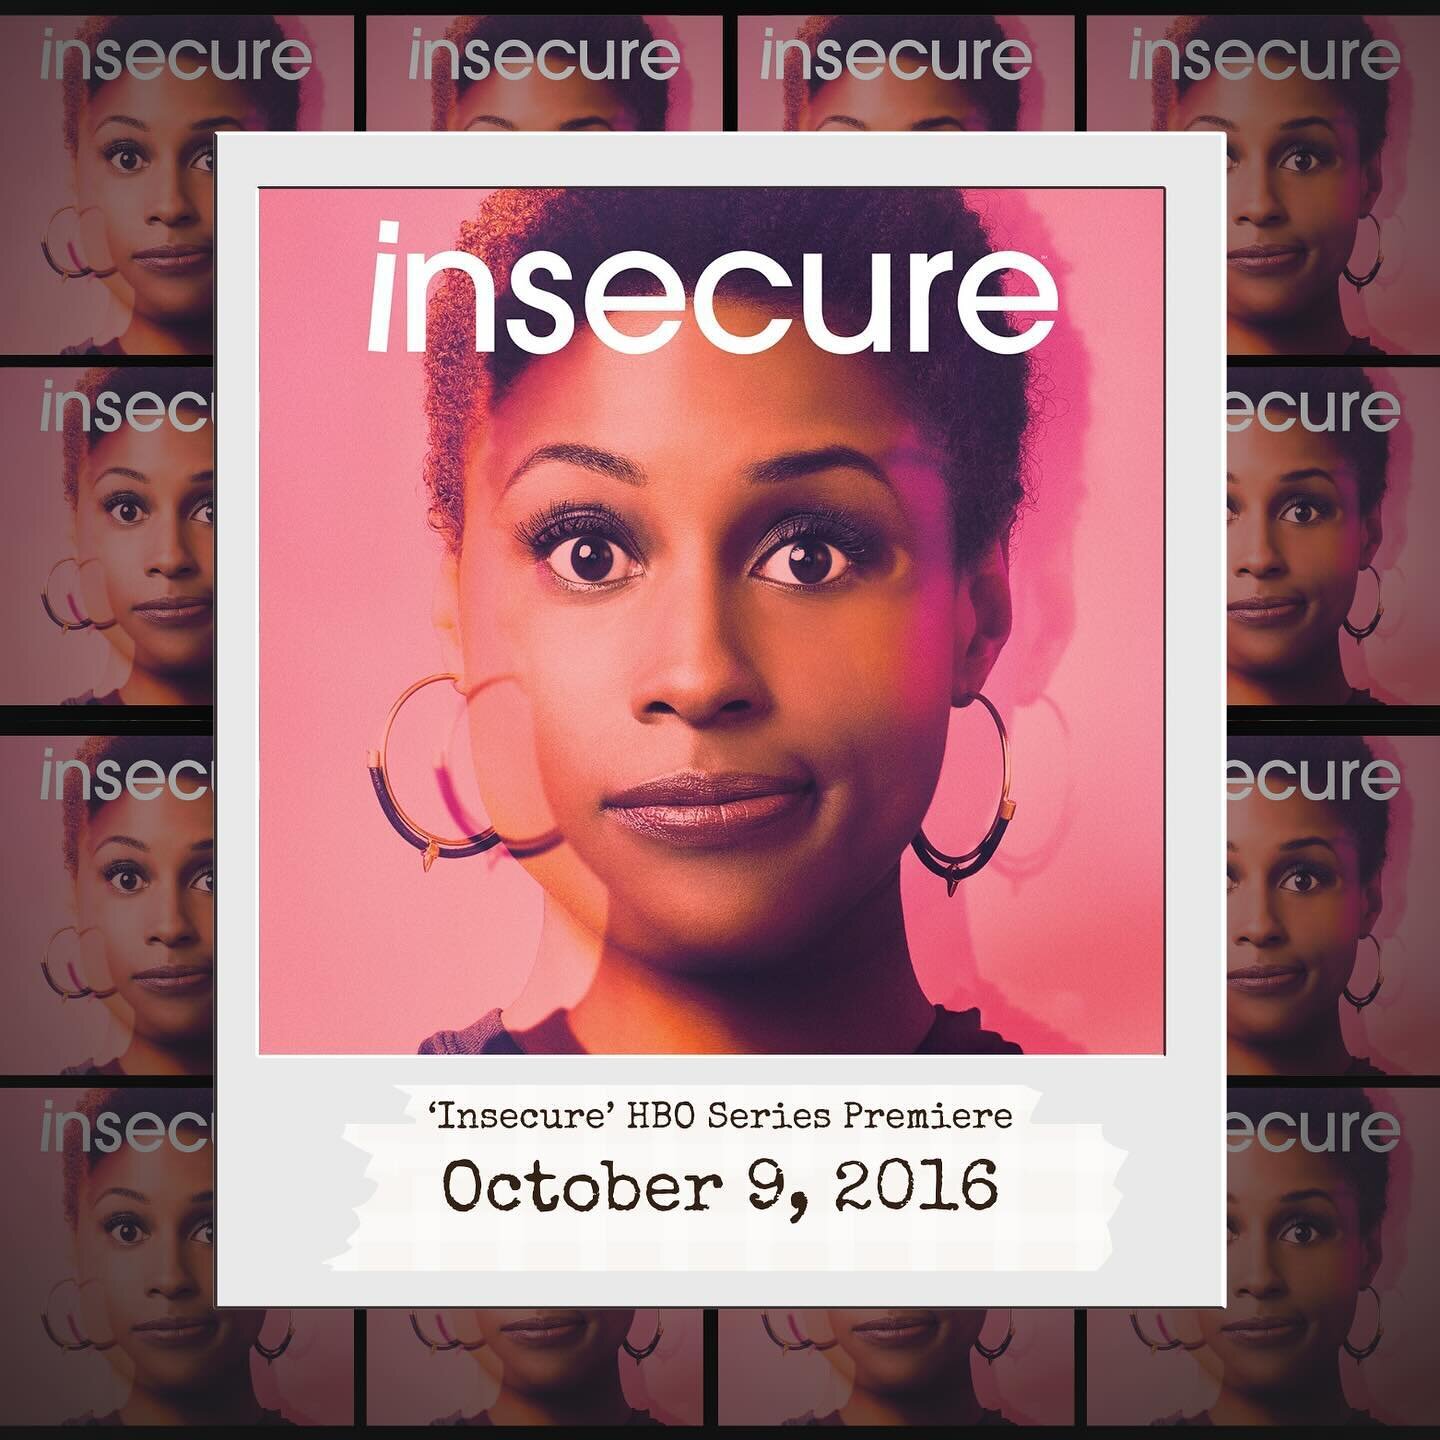 Mirror B**** will always have a special place in our hearts 🫶🏾 7 years ago @issarae &lsquo;s hit-series &lsquo;Insecure&rsquo; aired on HBO. Is it time for a(nother) rewatch? 📺 

#onthisday #popculturehistory #issarae #insecure